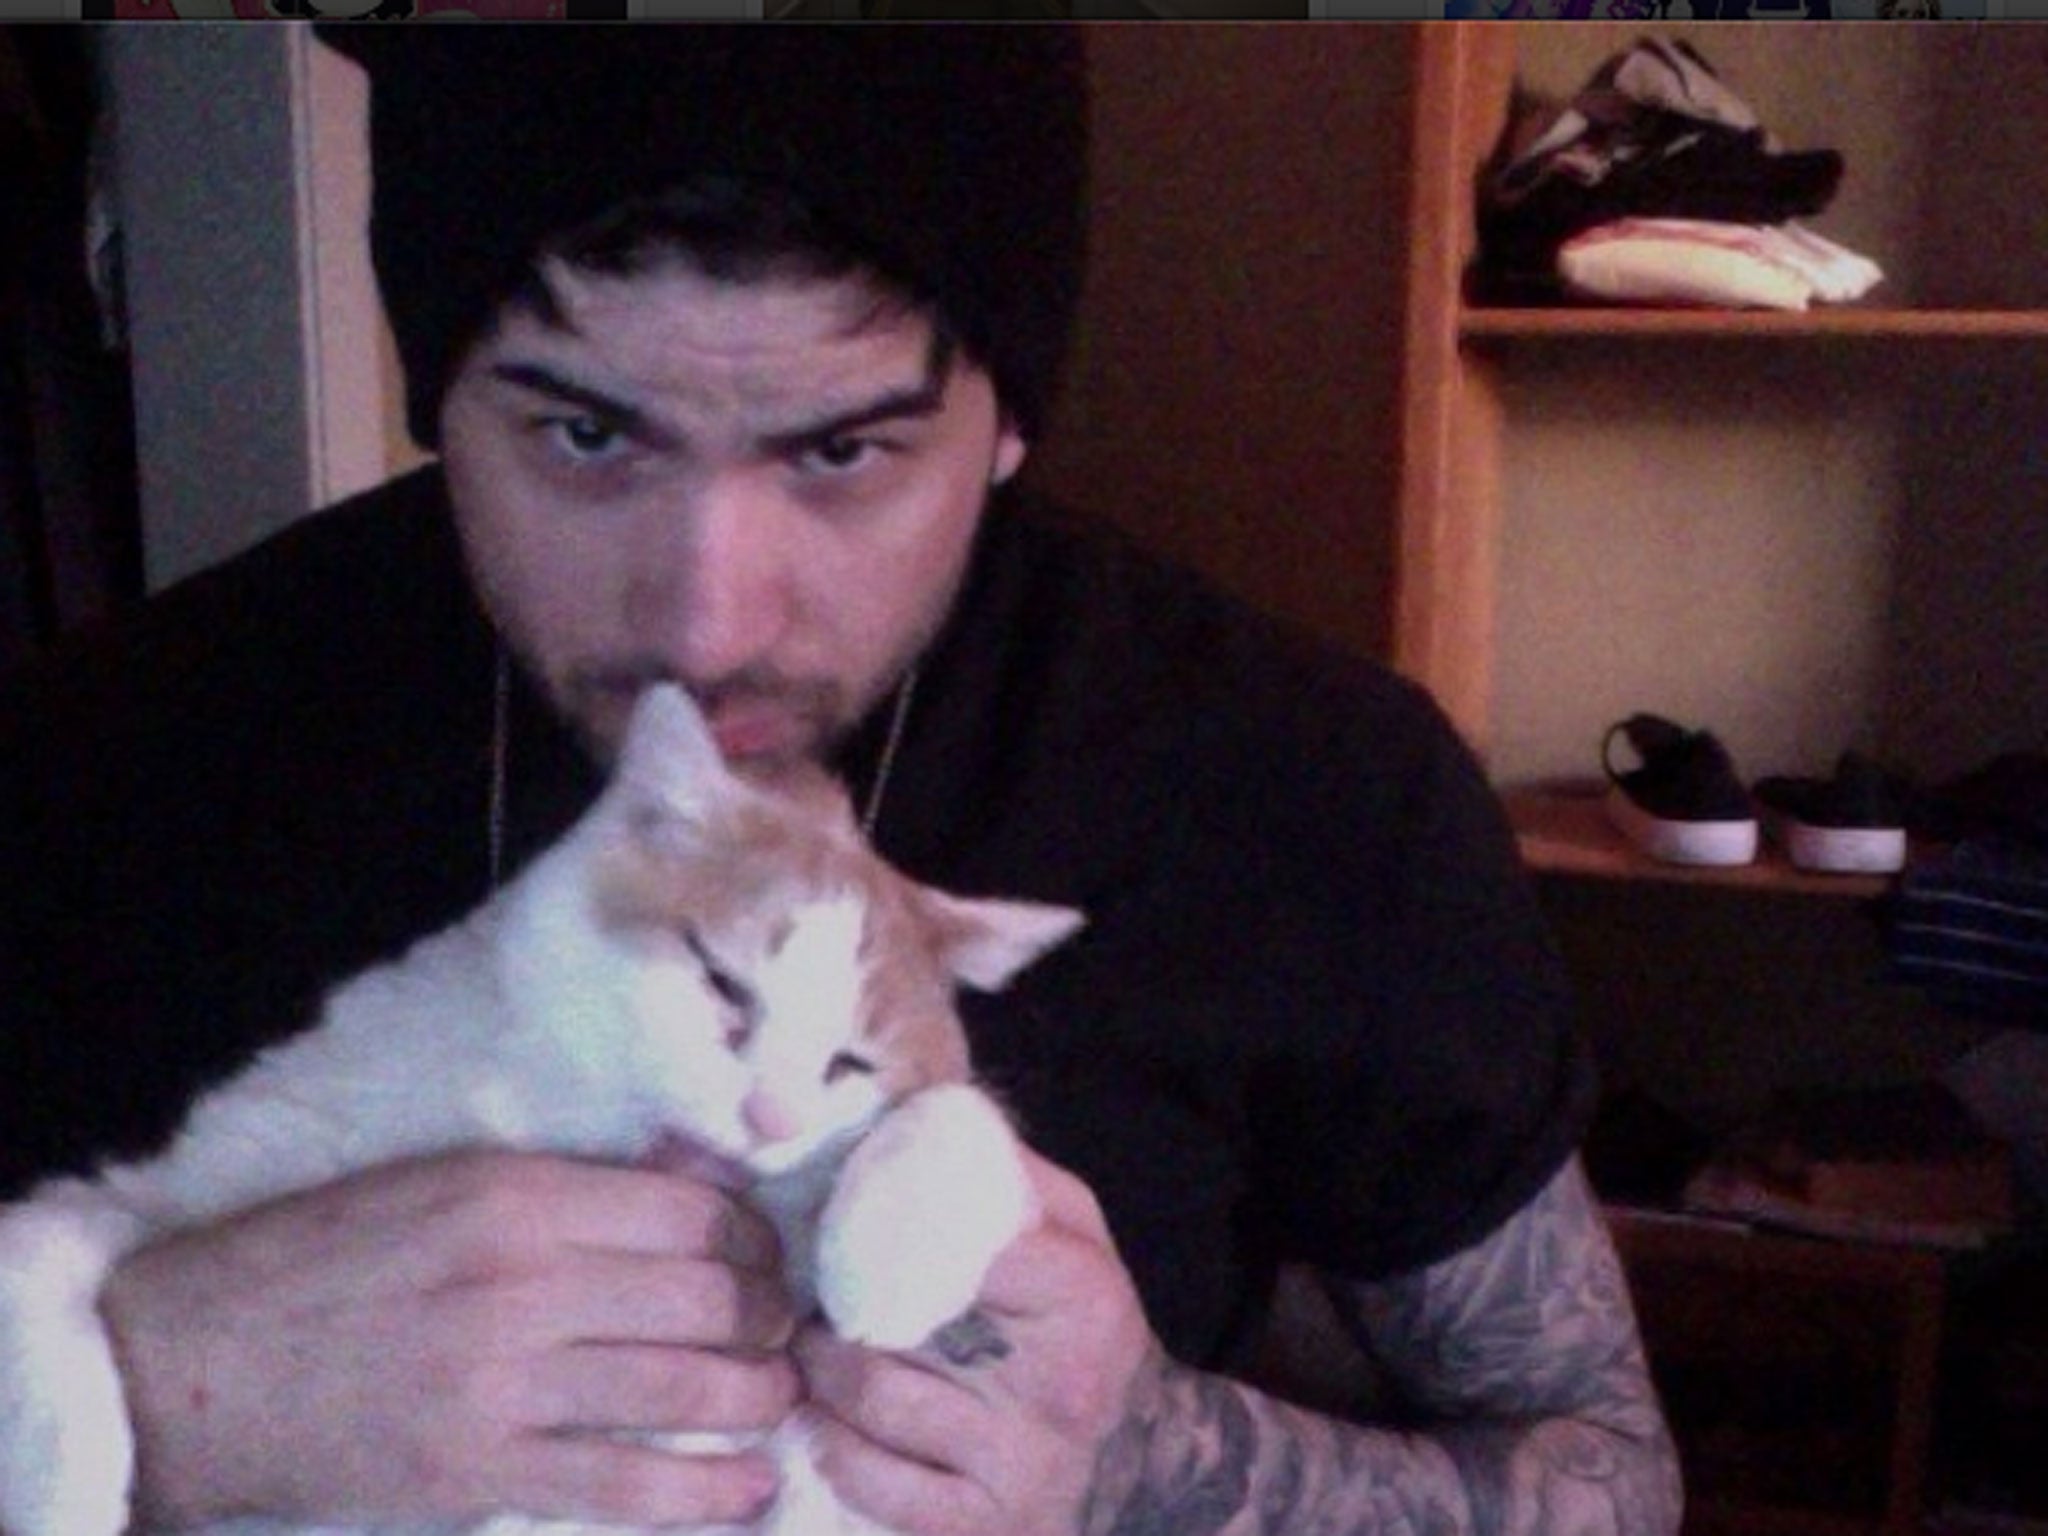 Hunter Moore was arrested in California for allegedly hacking into e-mail accounts and stealing nude photographs